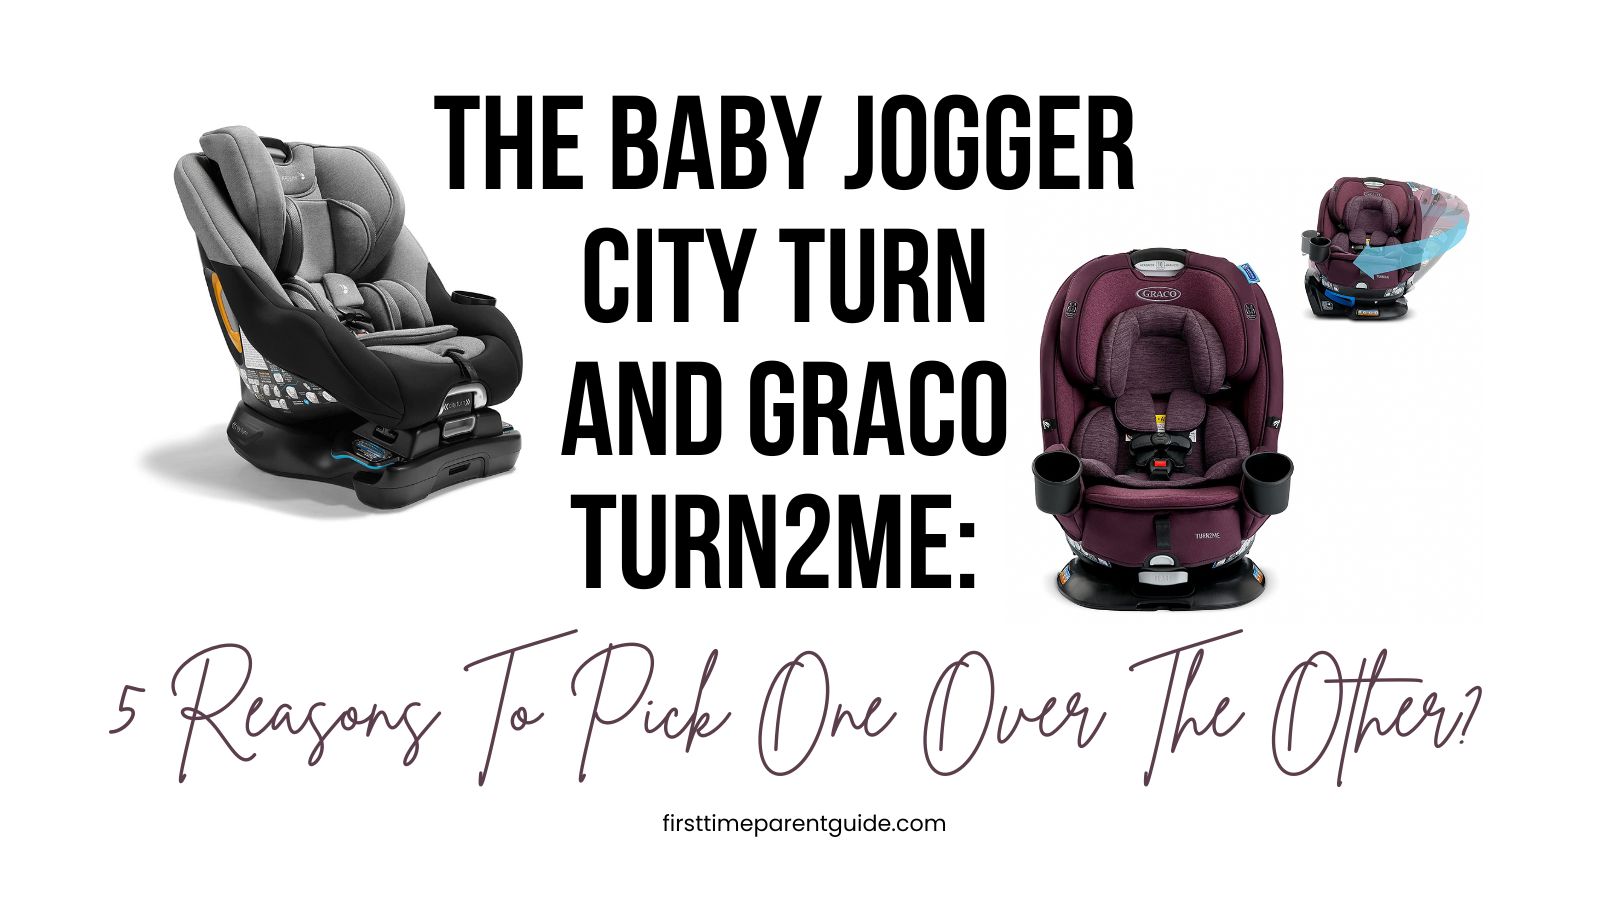 the Baby Jogger City Turn and